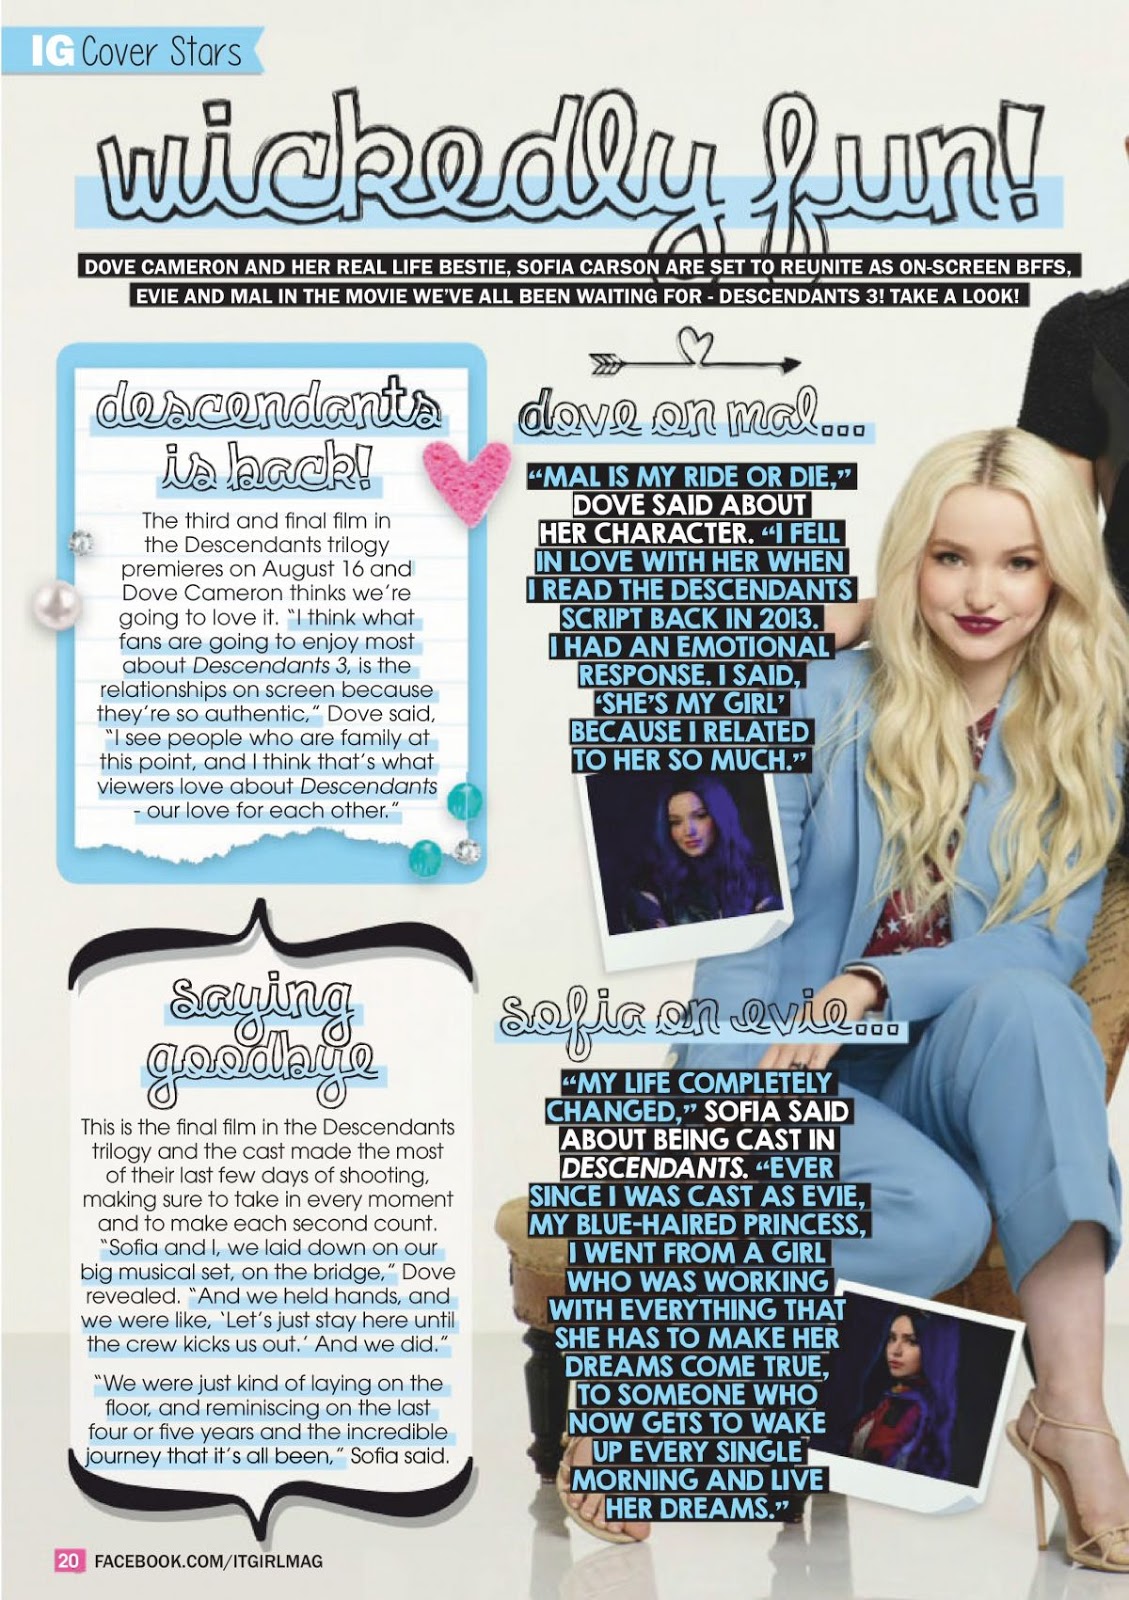 Dove Cameron And Sofia Carson Clicked For It Girl Magazine September 19